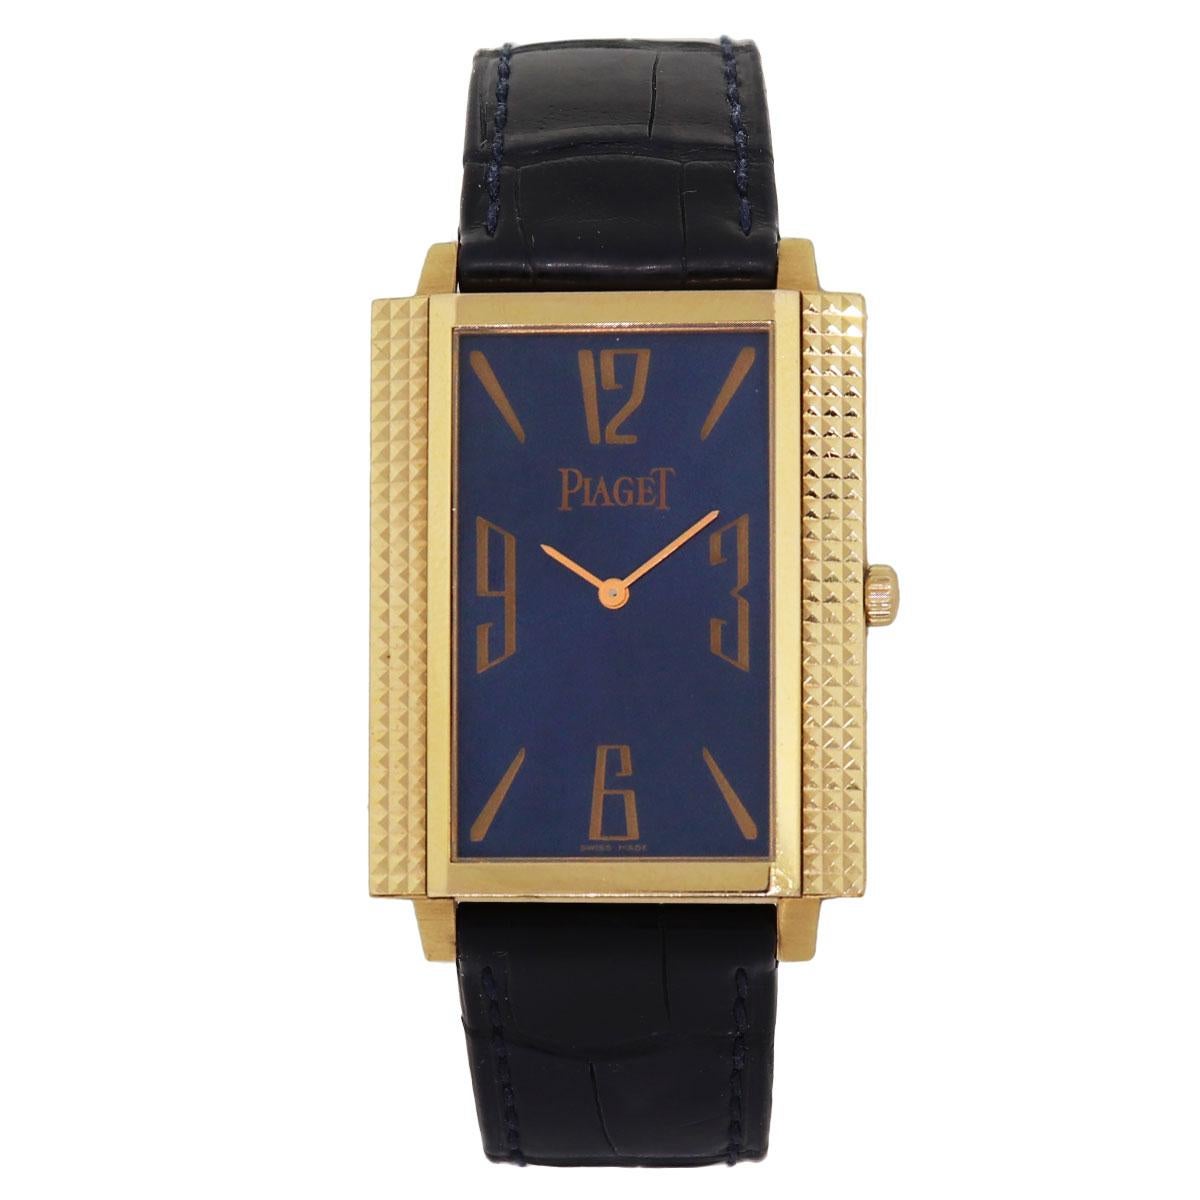 Brand: Piaget
MPN: 90300
Model: Mécanique
Case Material: 18k rose gold
Case Diameter: 27mm
Bezel: Pattern texture
Dial: Blue dial
Bracelet: Black leather strap (factory)
Crystal: Sapphire
Size: Will fit up to a 7″ wrist
Clasp: 18k rose gold tang